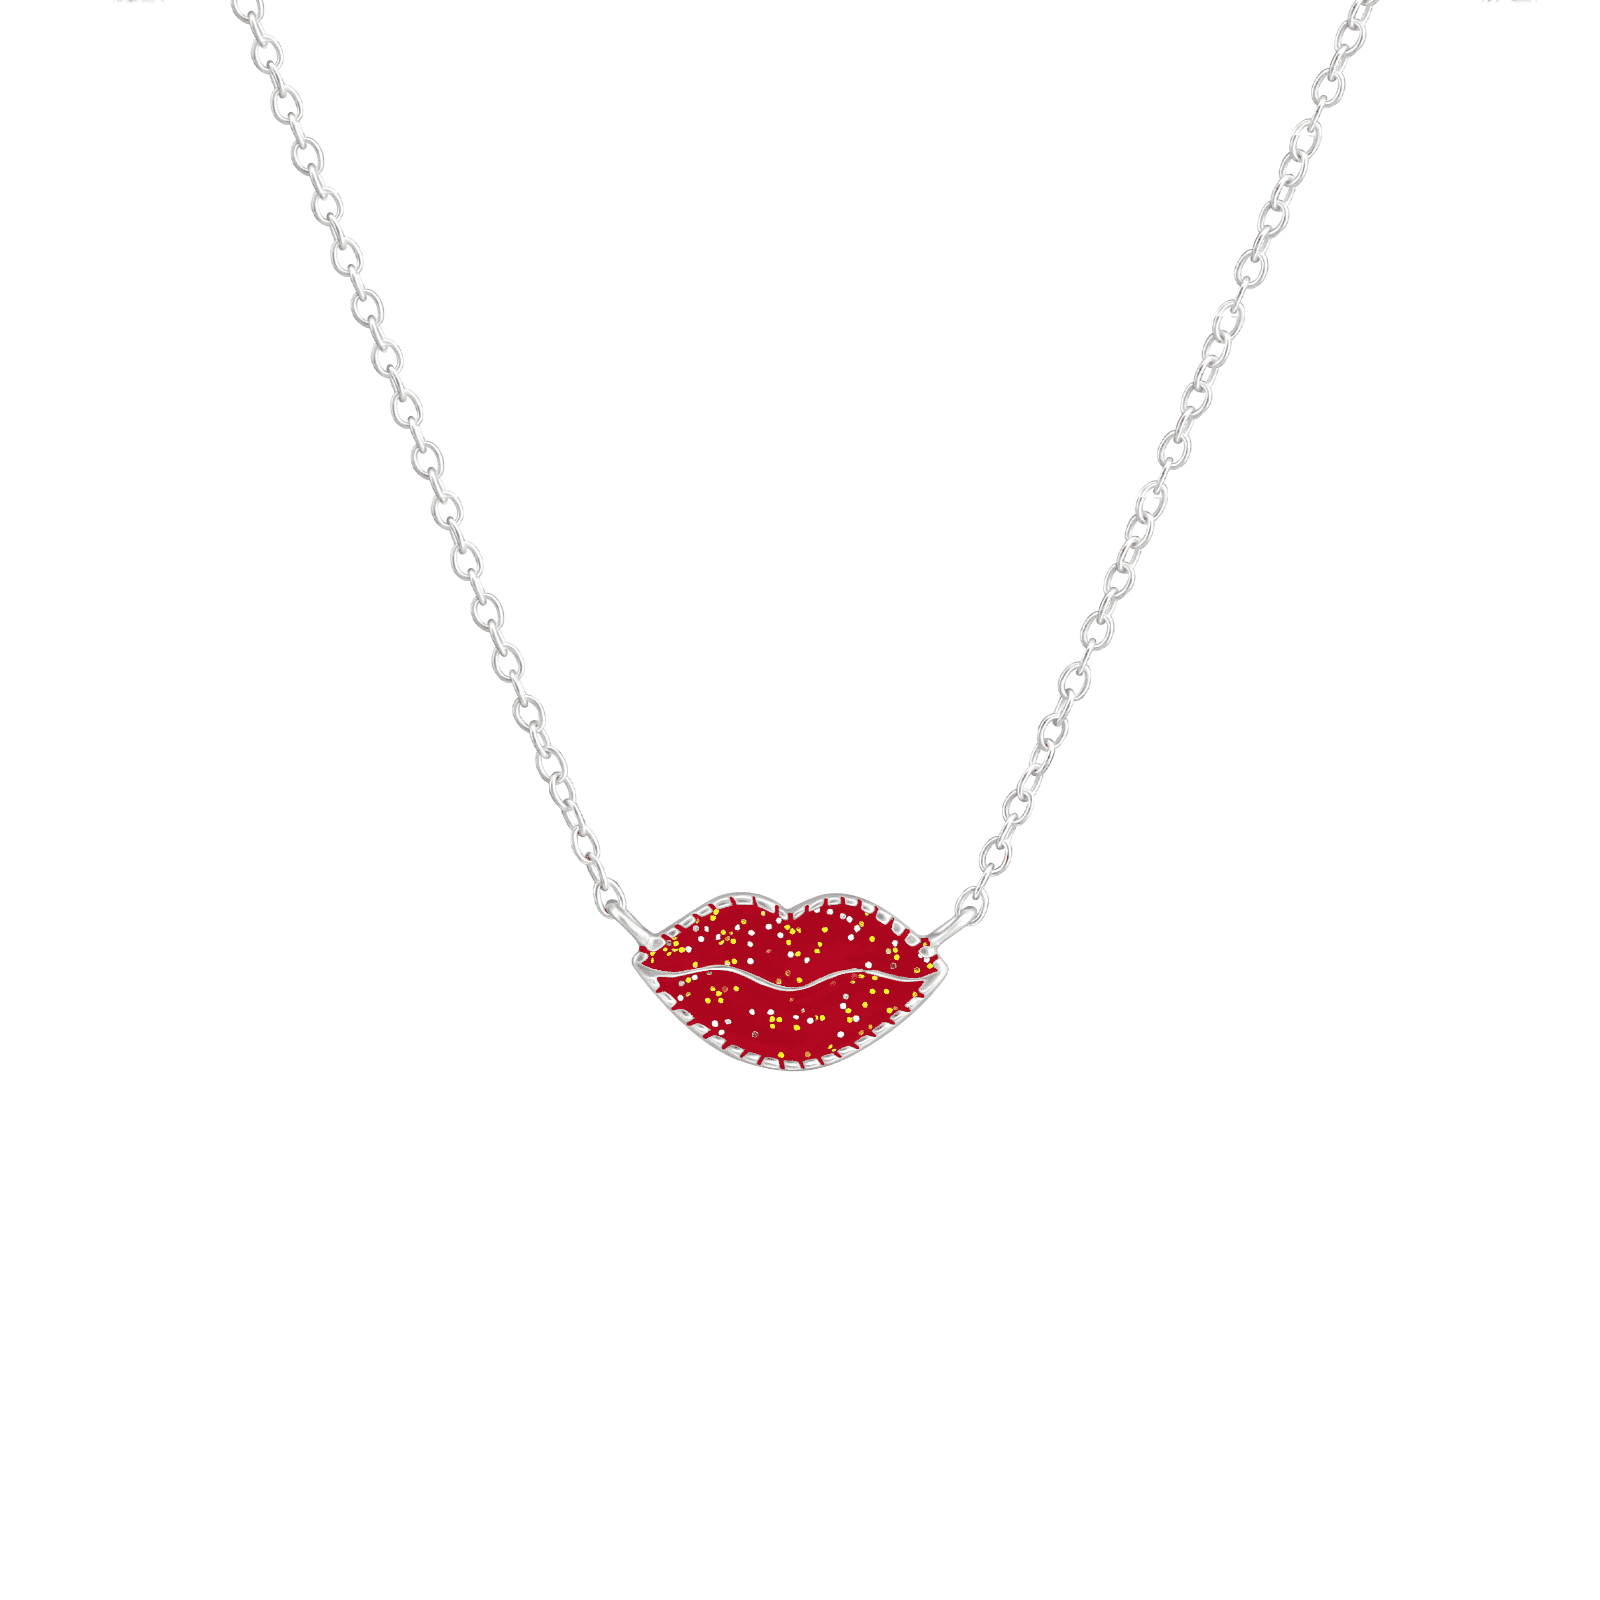 Asfour Enamel Lips Shape 925 Sterling Silver Necklace,Red